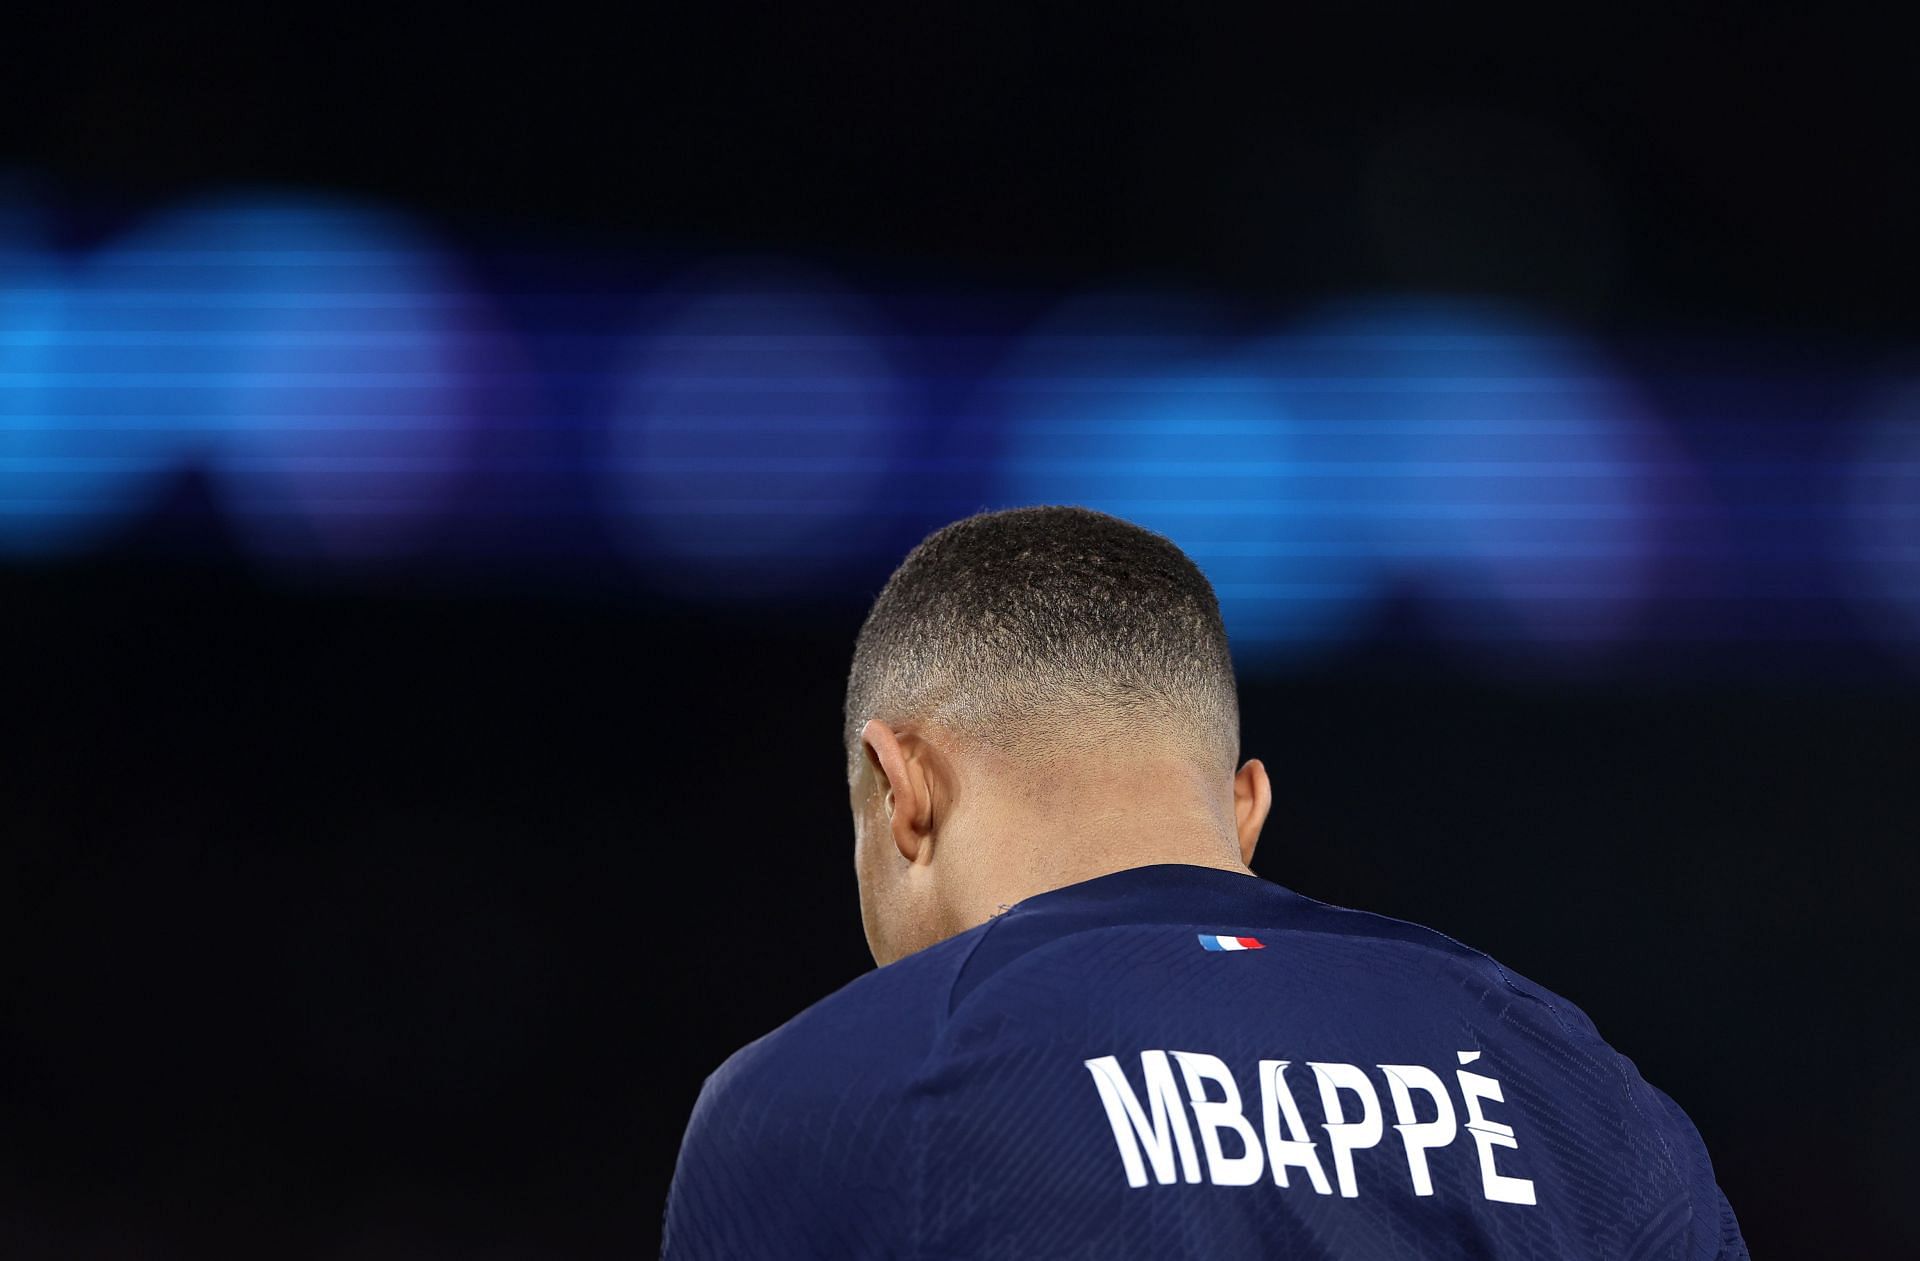 Kylian Mbappe will have a new shirt number at Real Madrid.